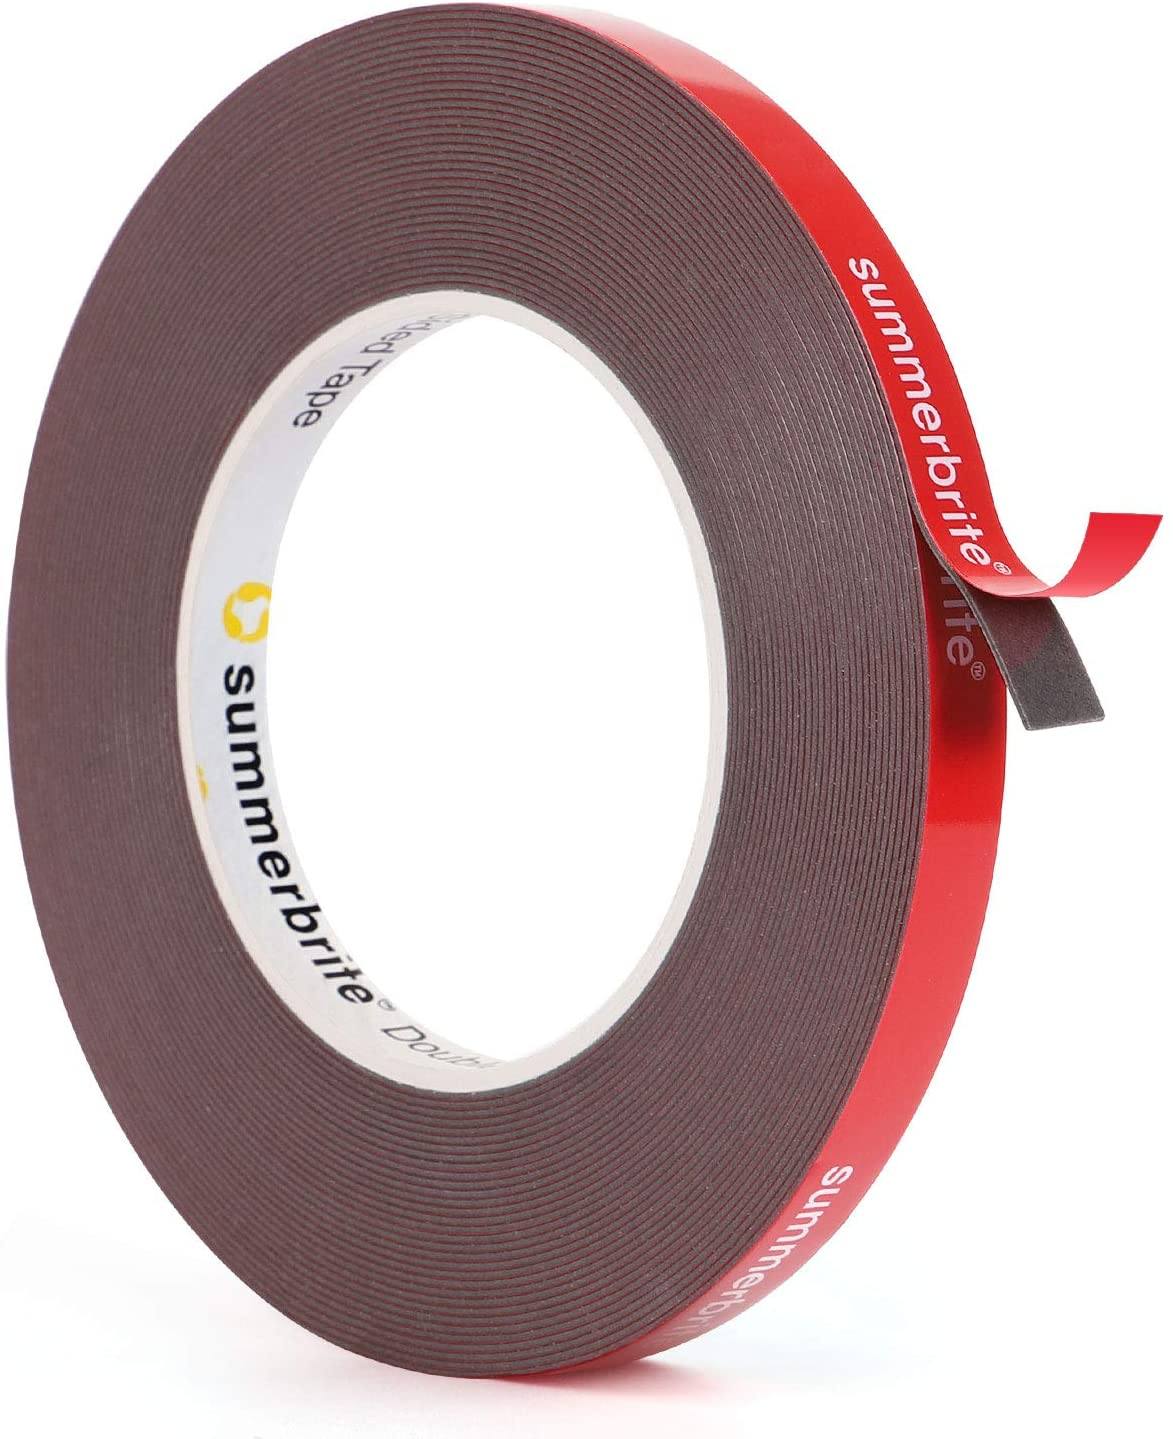 3 M VHB Double Sided Tape Heavy Duty Mounting Transparent